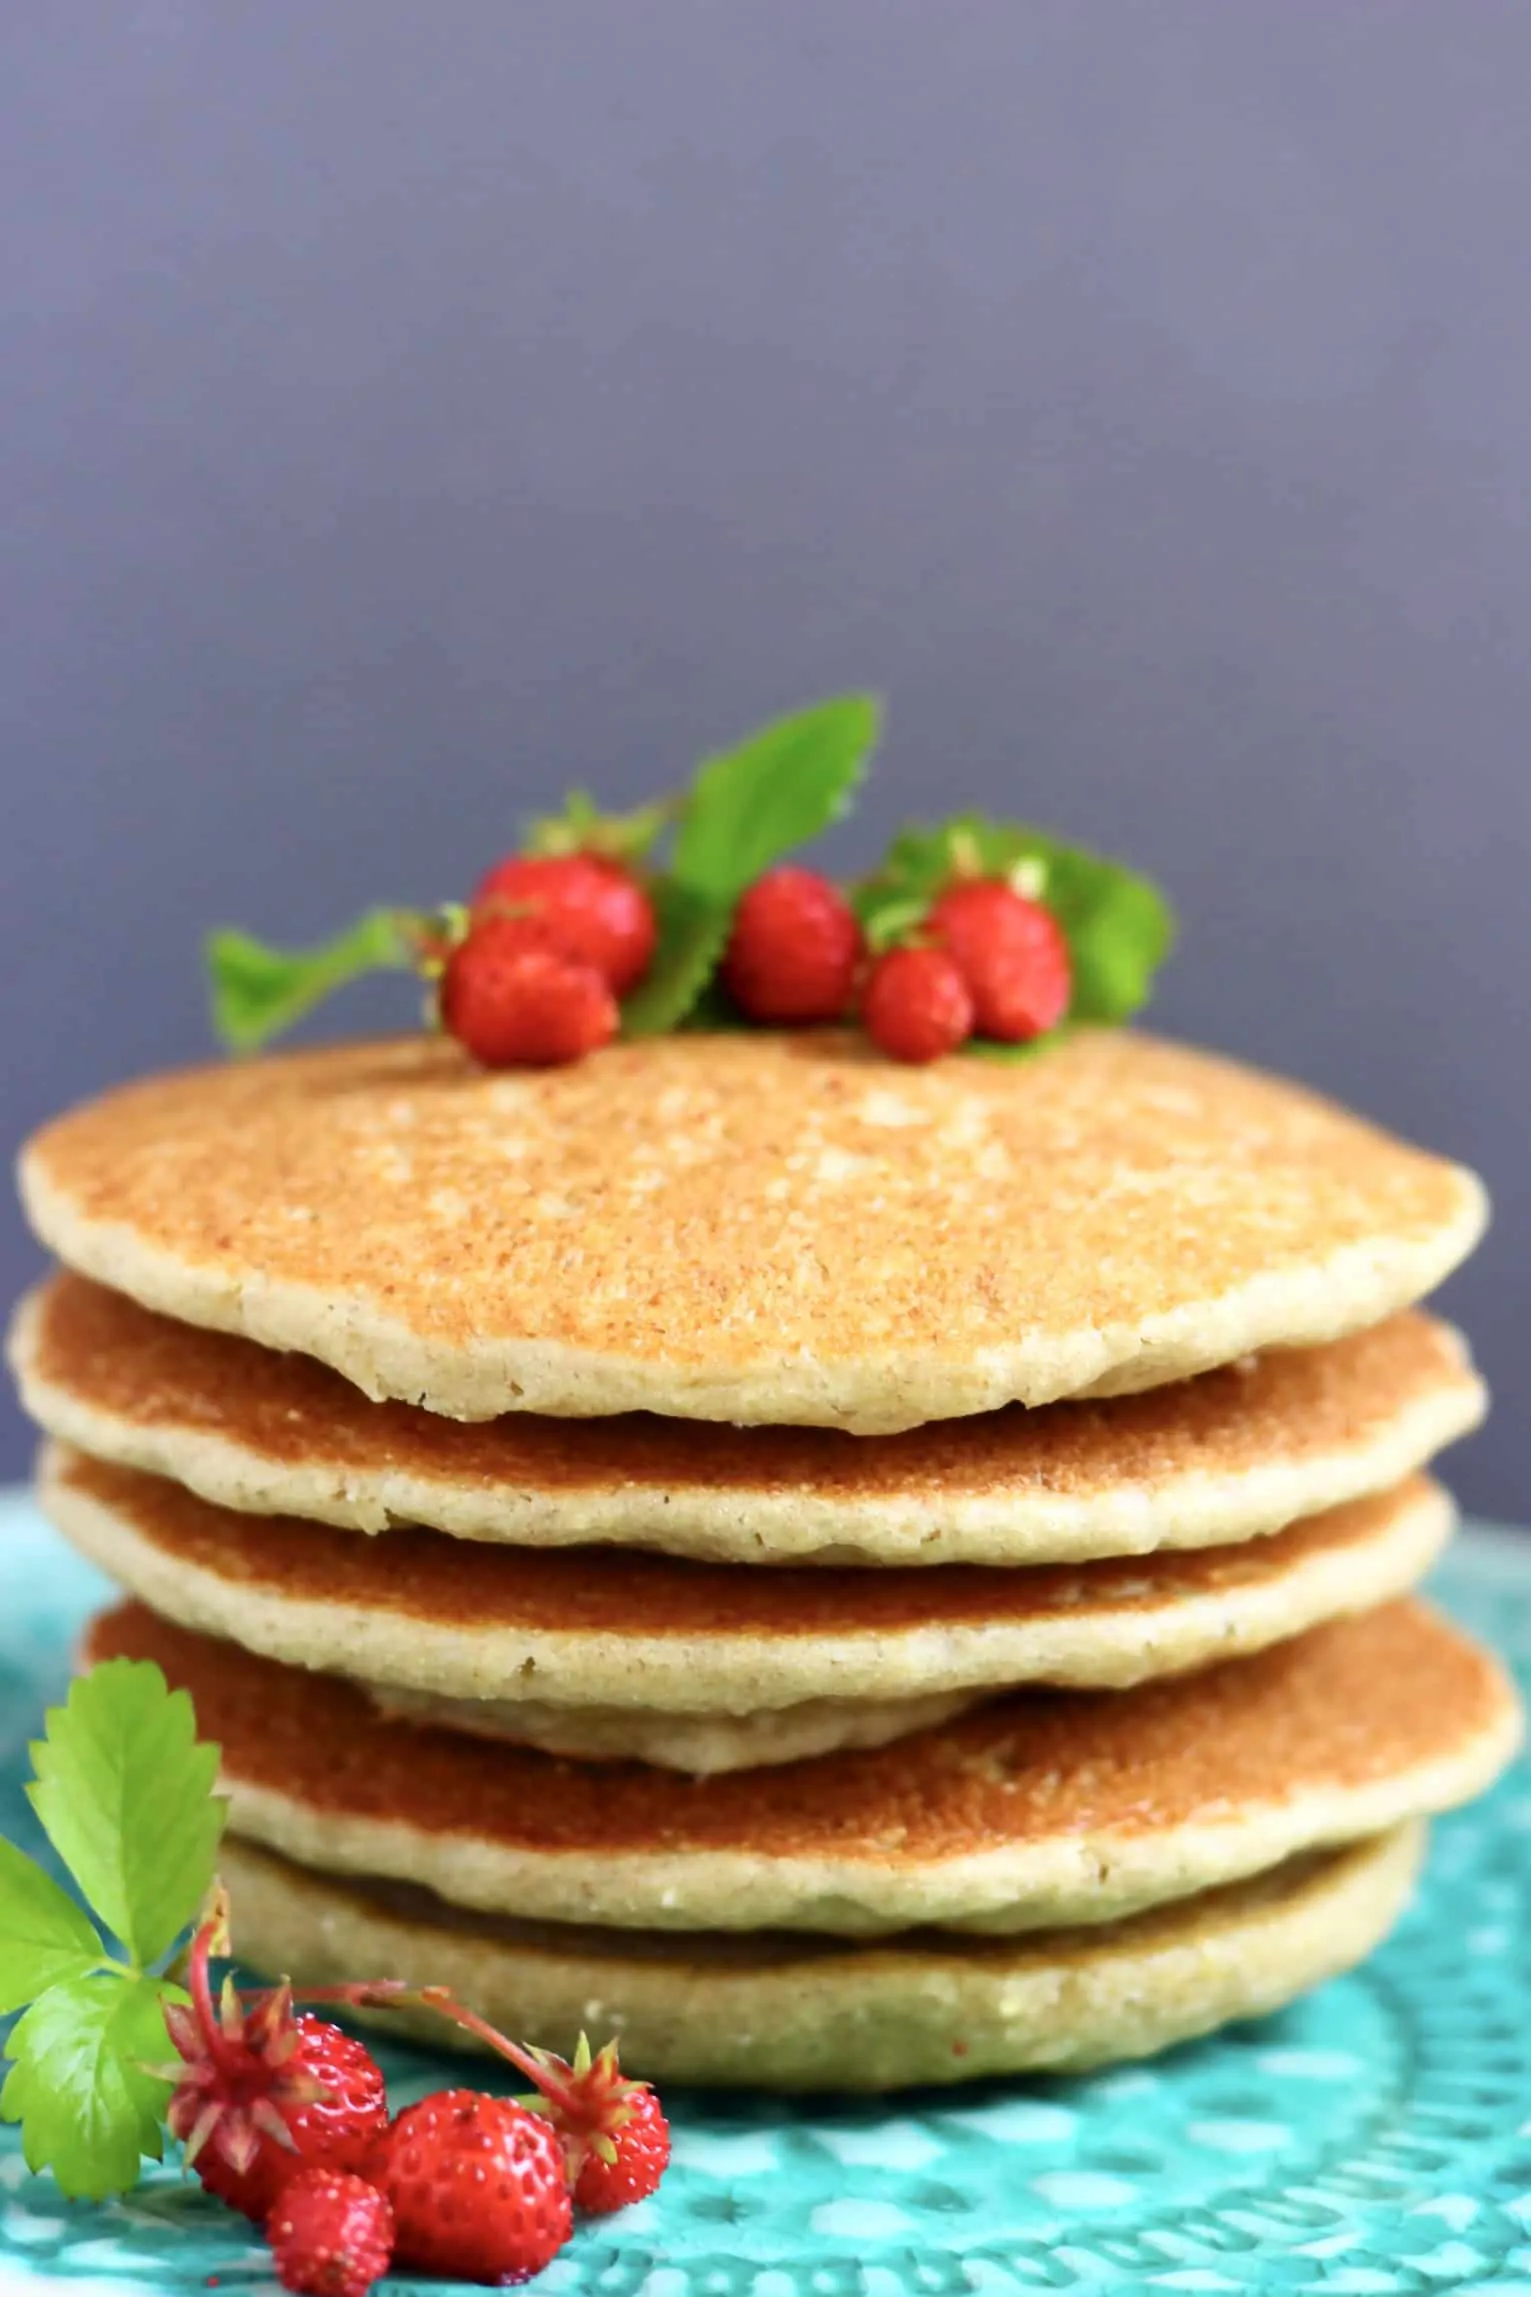 A stack of five quinoa pancakes topped with wild strawberries on a plate